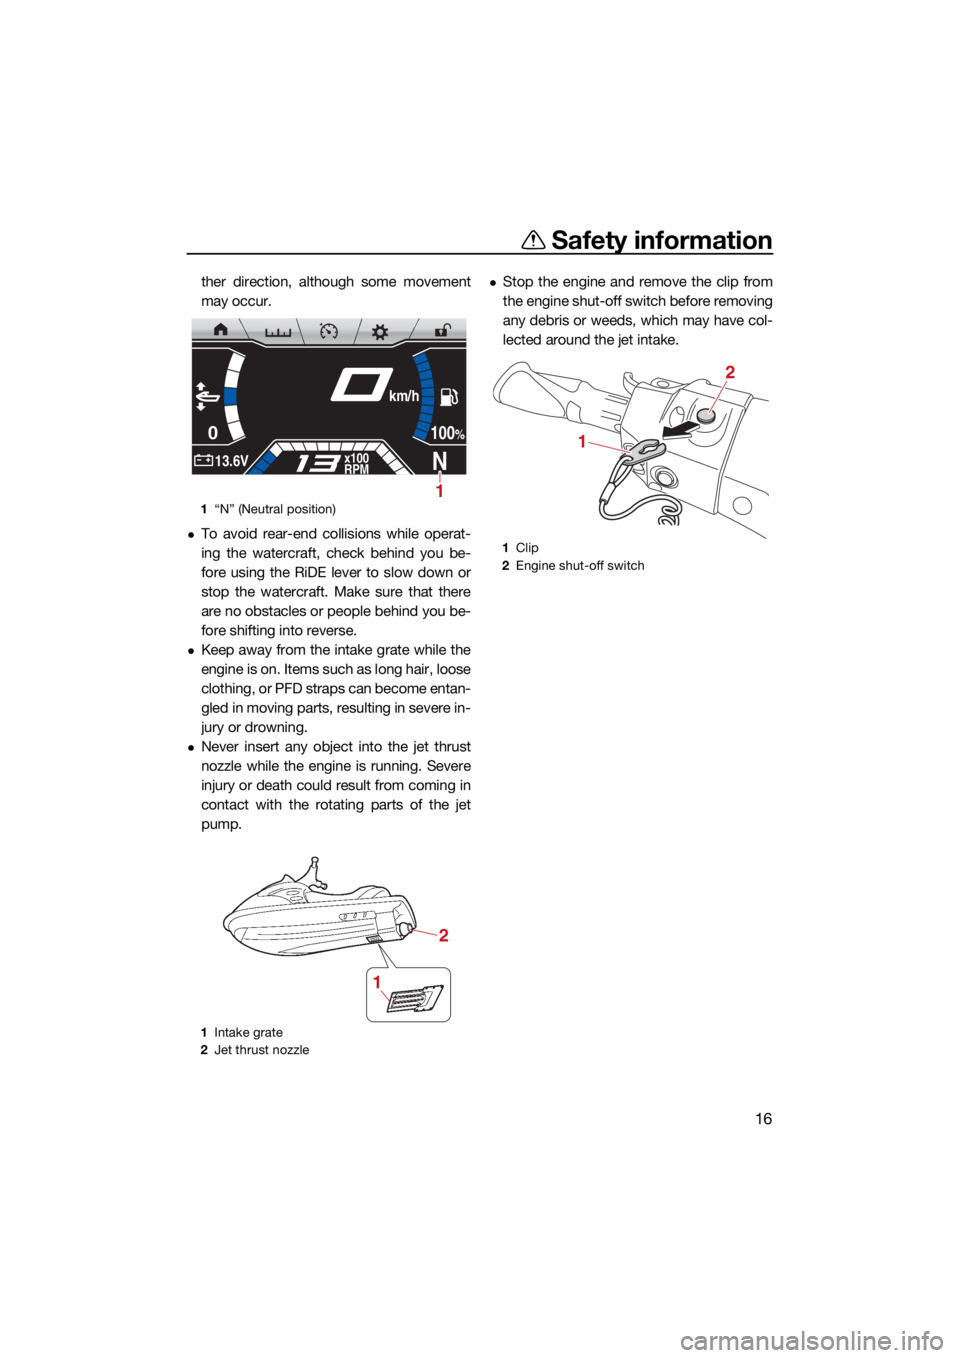 YAMAHA FX HO 2021 Owners Manual Safety information
16
ther direction, although some movement
may occur.
To avoid rear-end collisions while operat-
ing the watercraft, check behind you be-
fore using the RiDE lever to slow down or